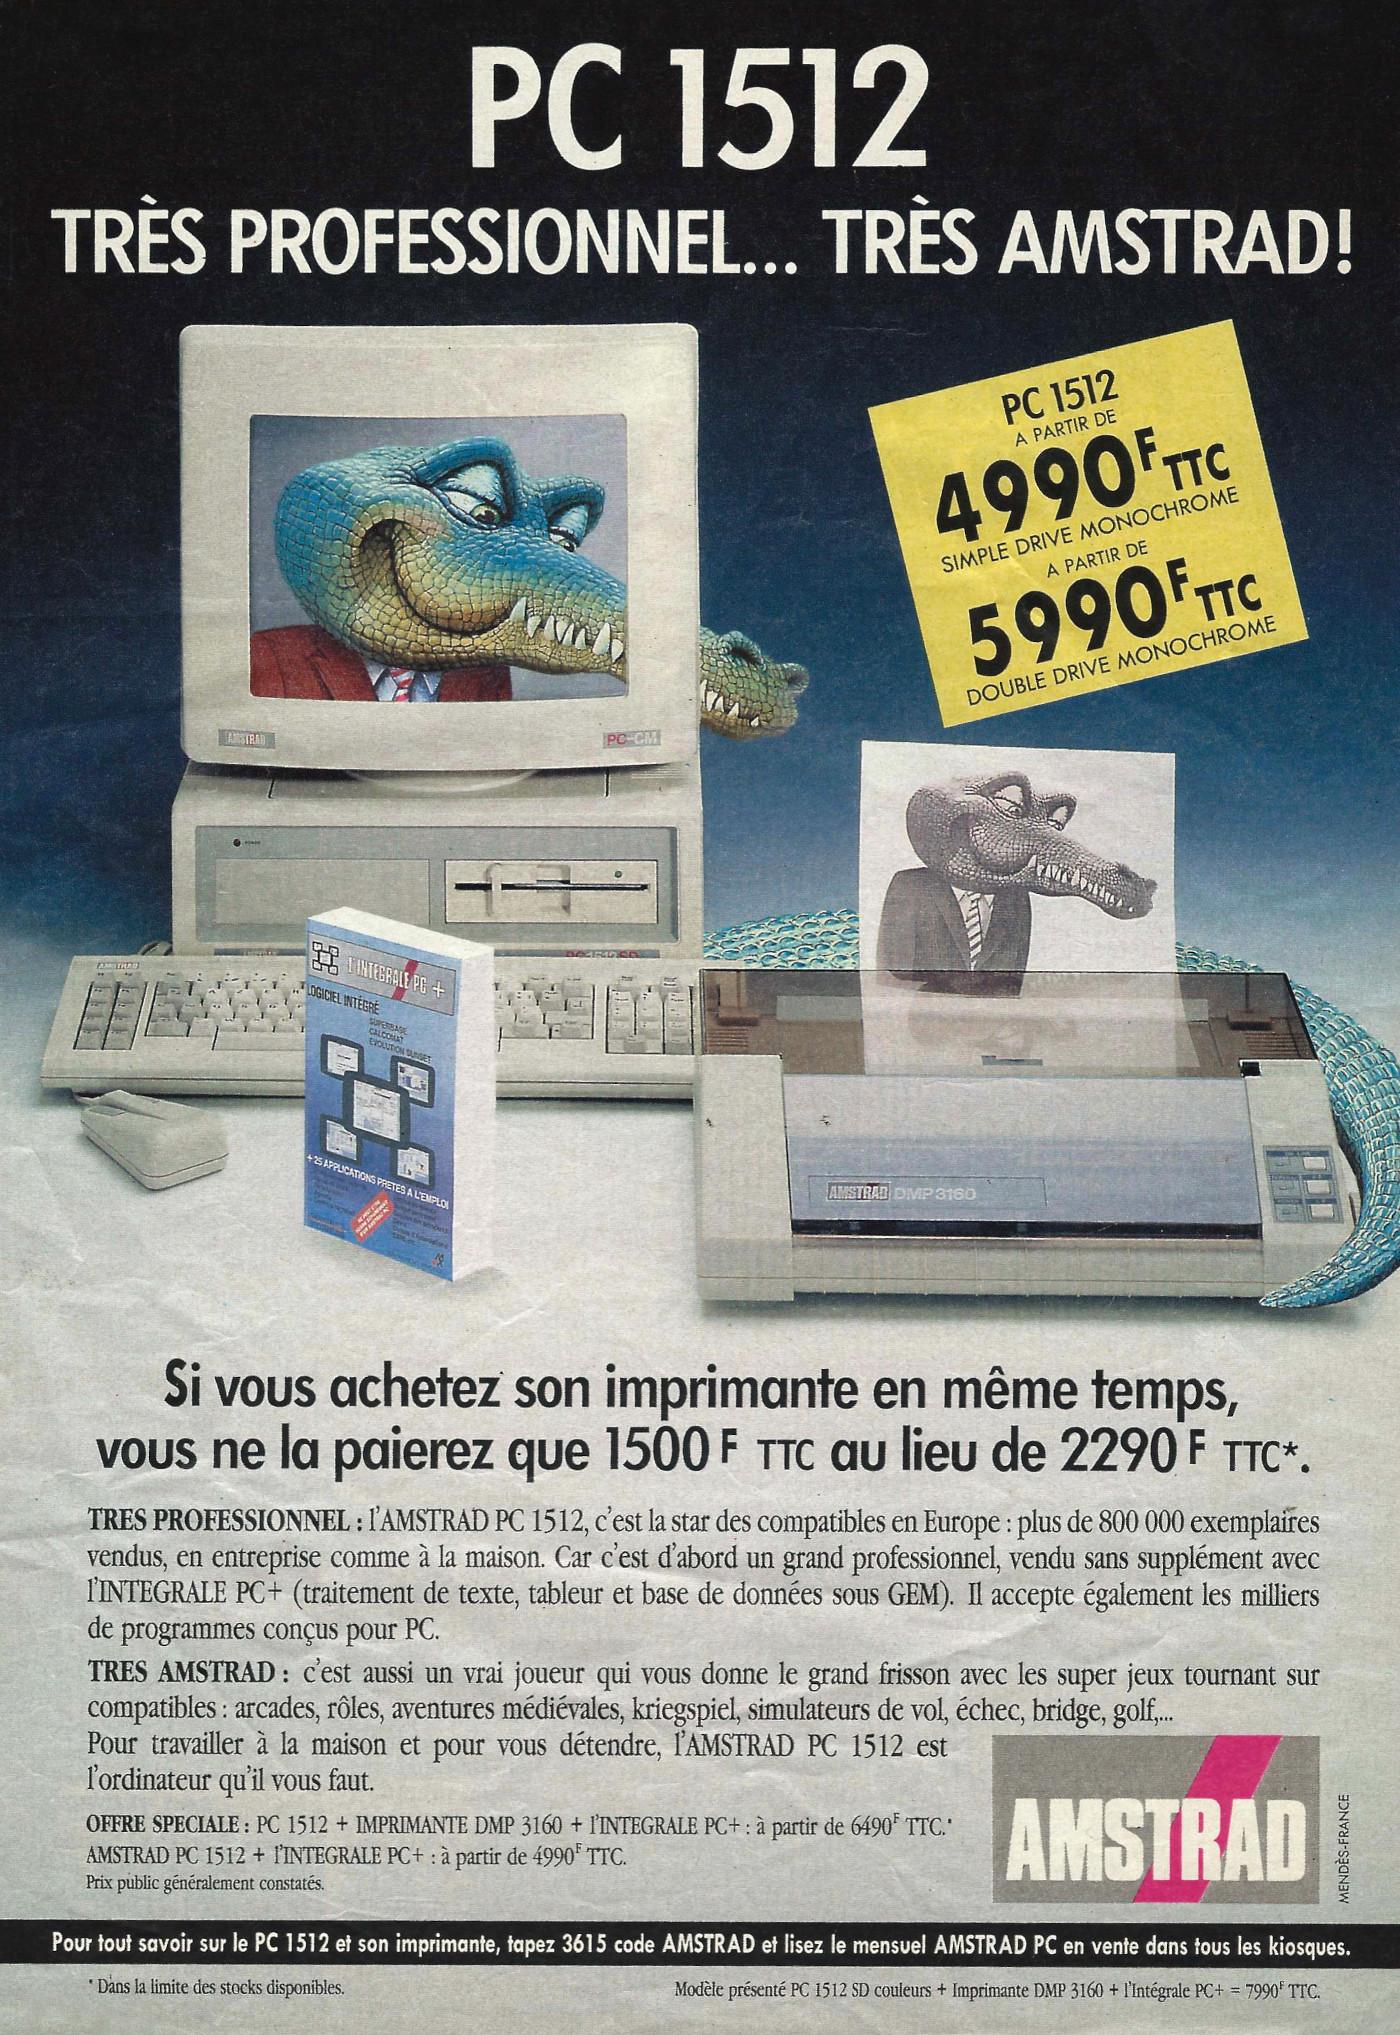 An Amstrad advert placed in a French magazine, showing the PC 1512 in a bundle offer with a printer for 1500F instead of 2290F, which is ab<span class='hilite'>ou</span>t a £79 disc<span class='hilite'>ou</span>nt, or £250 in 2024. The advert also claims that more than 800,000 1512s had been sold to businesses and home users.